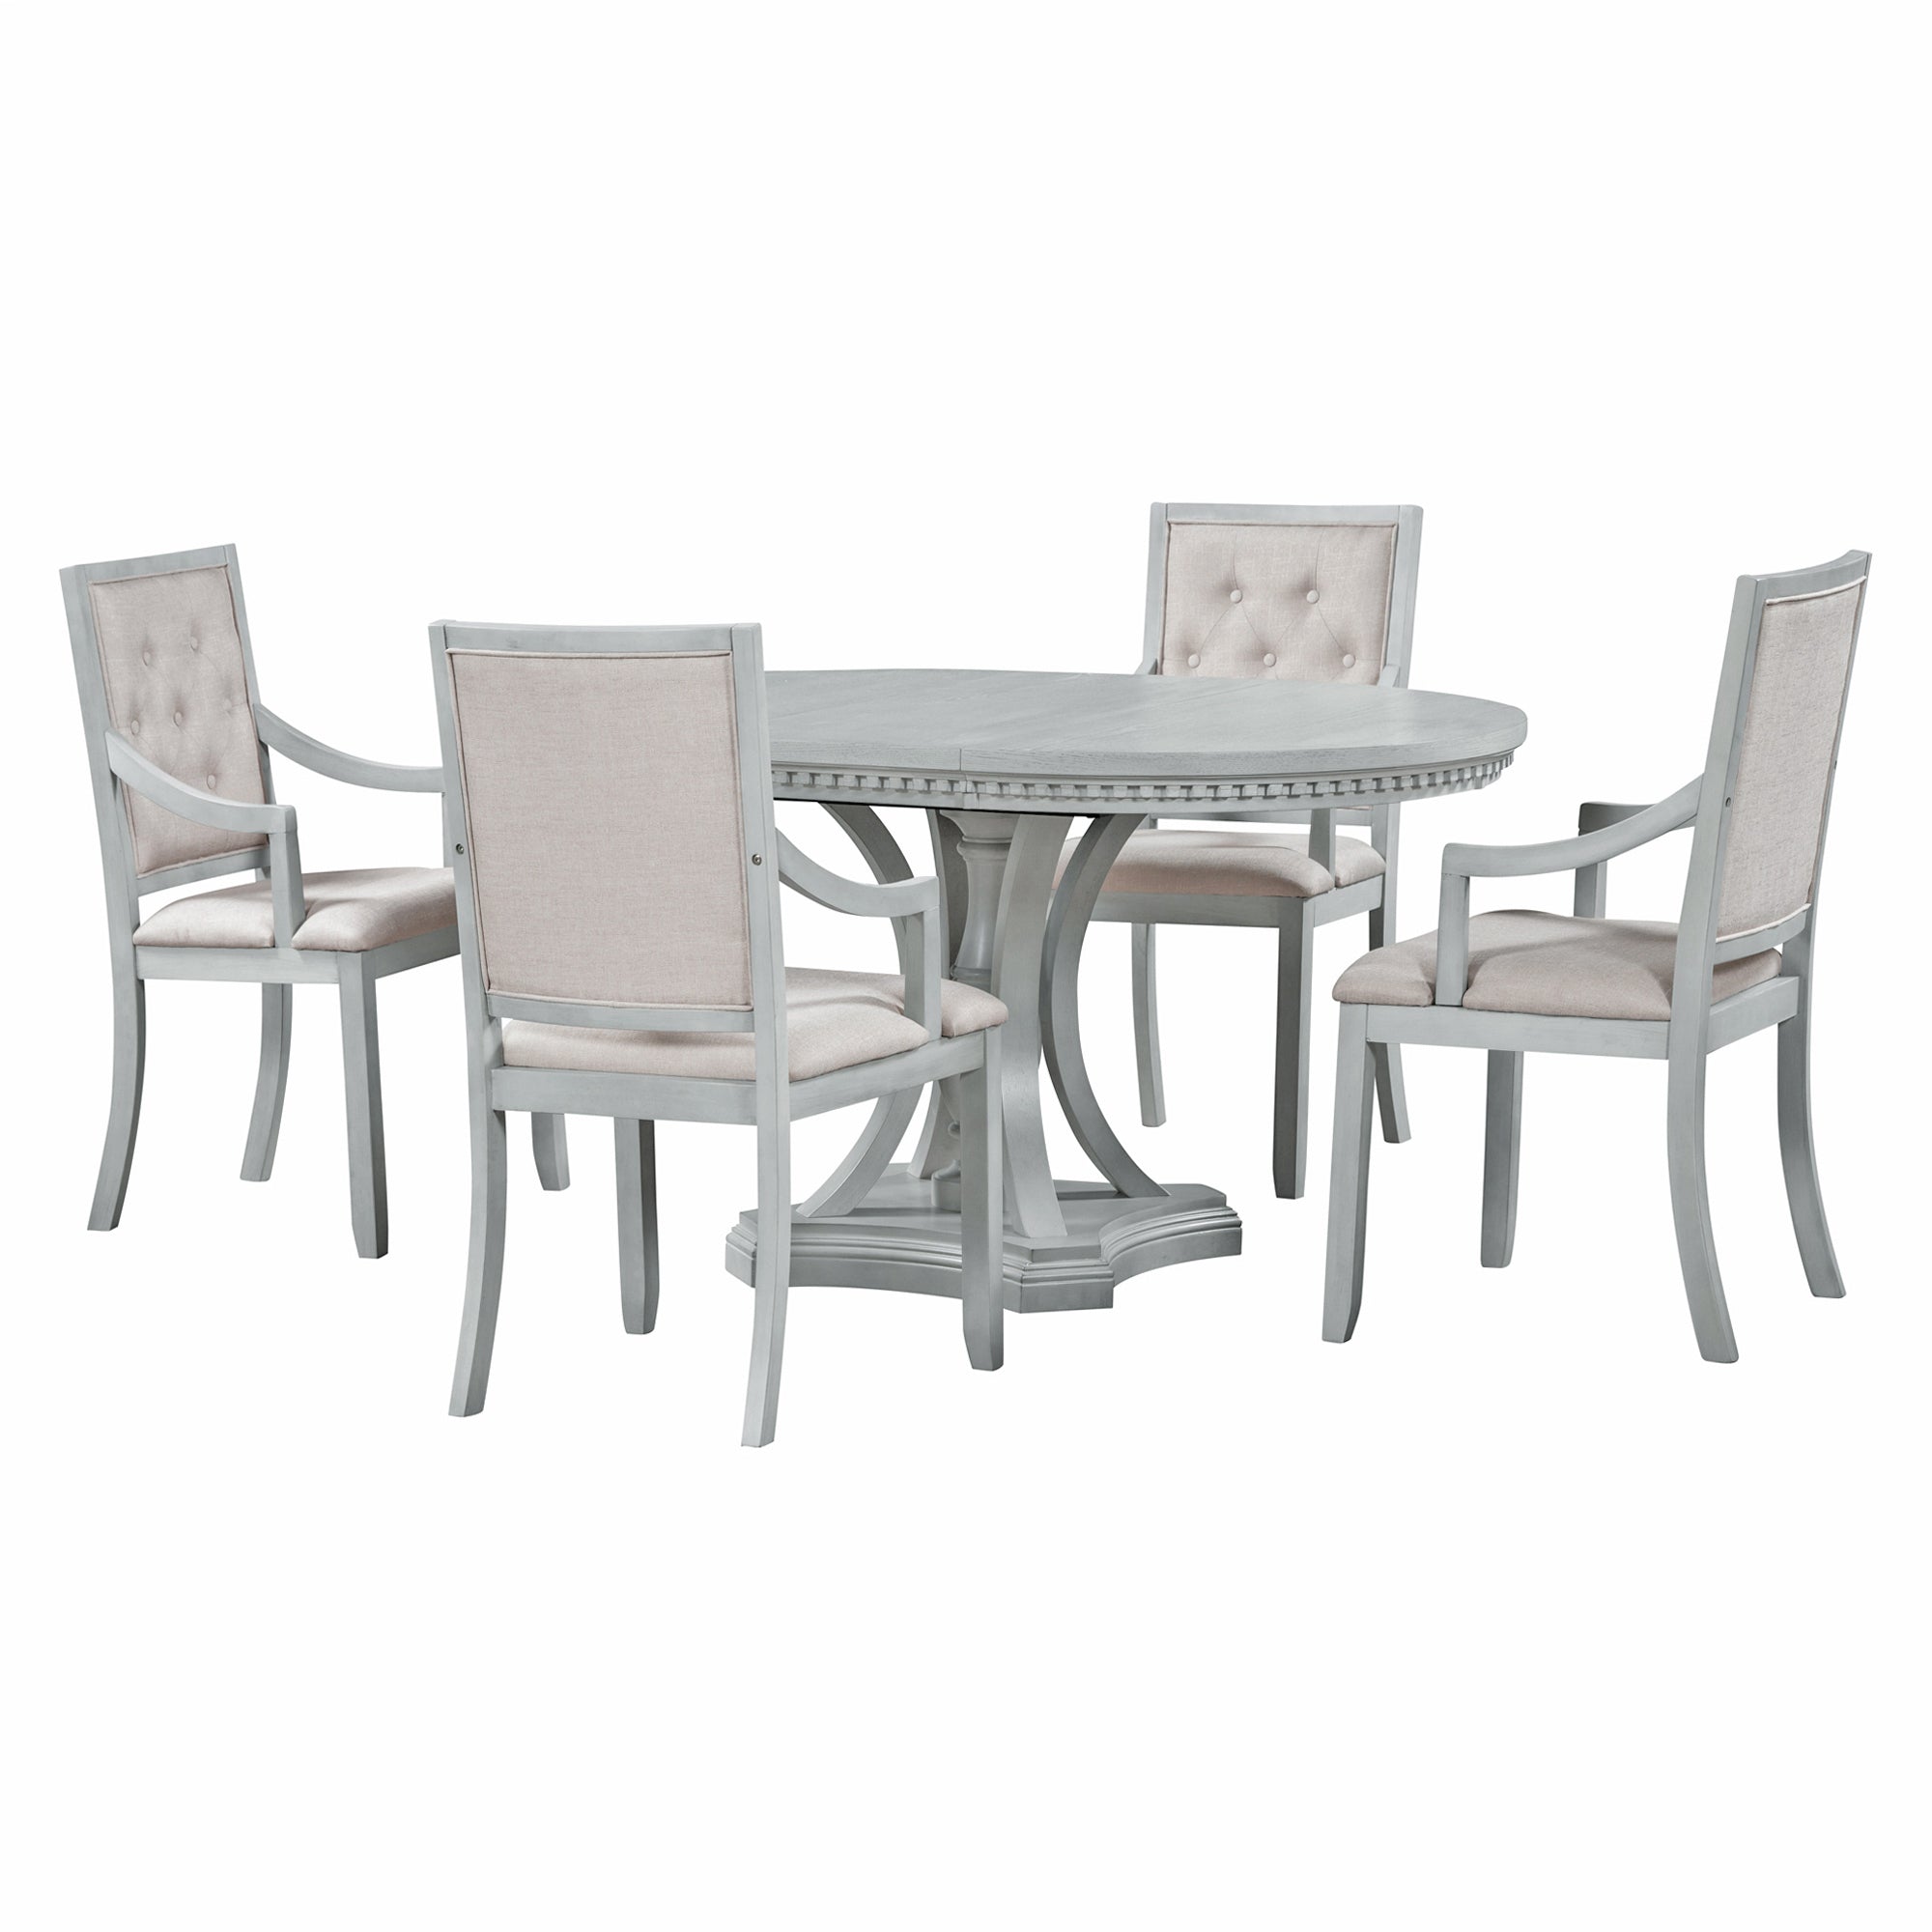 Retro 5-piece Dining Set Extendable Round Table and 4 Chairs - Antique Grey Oak